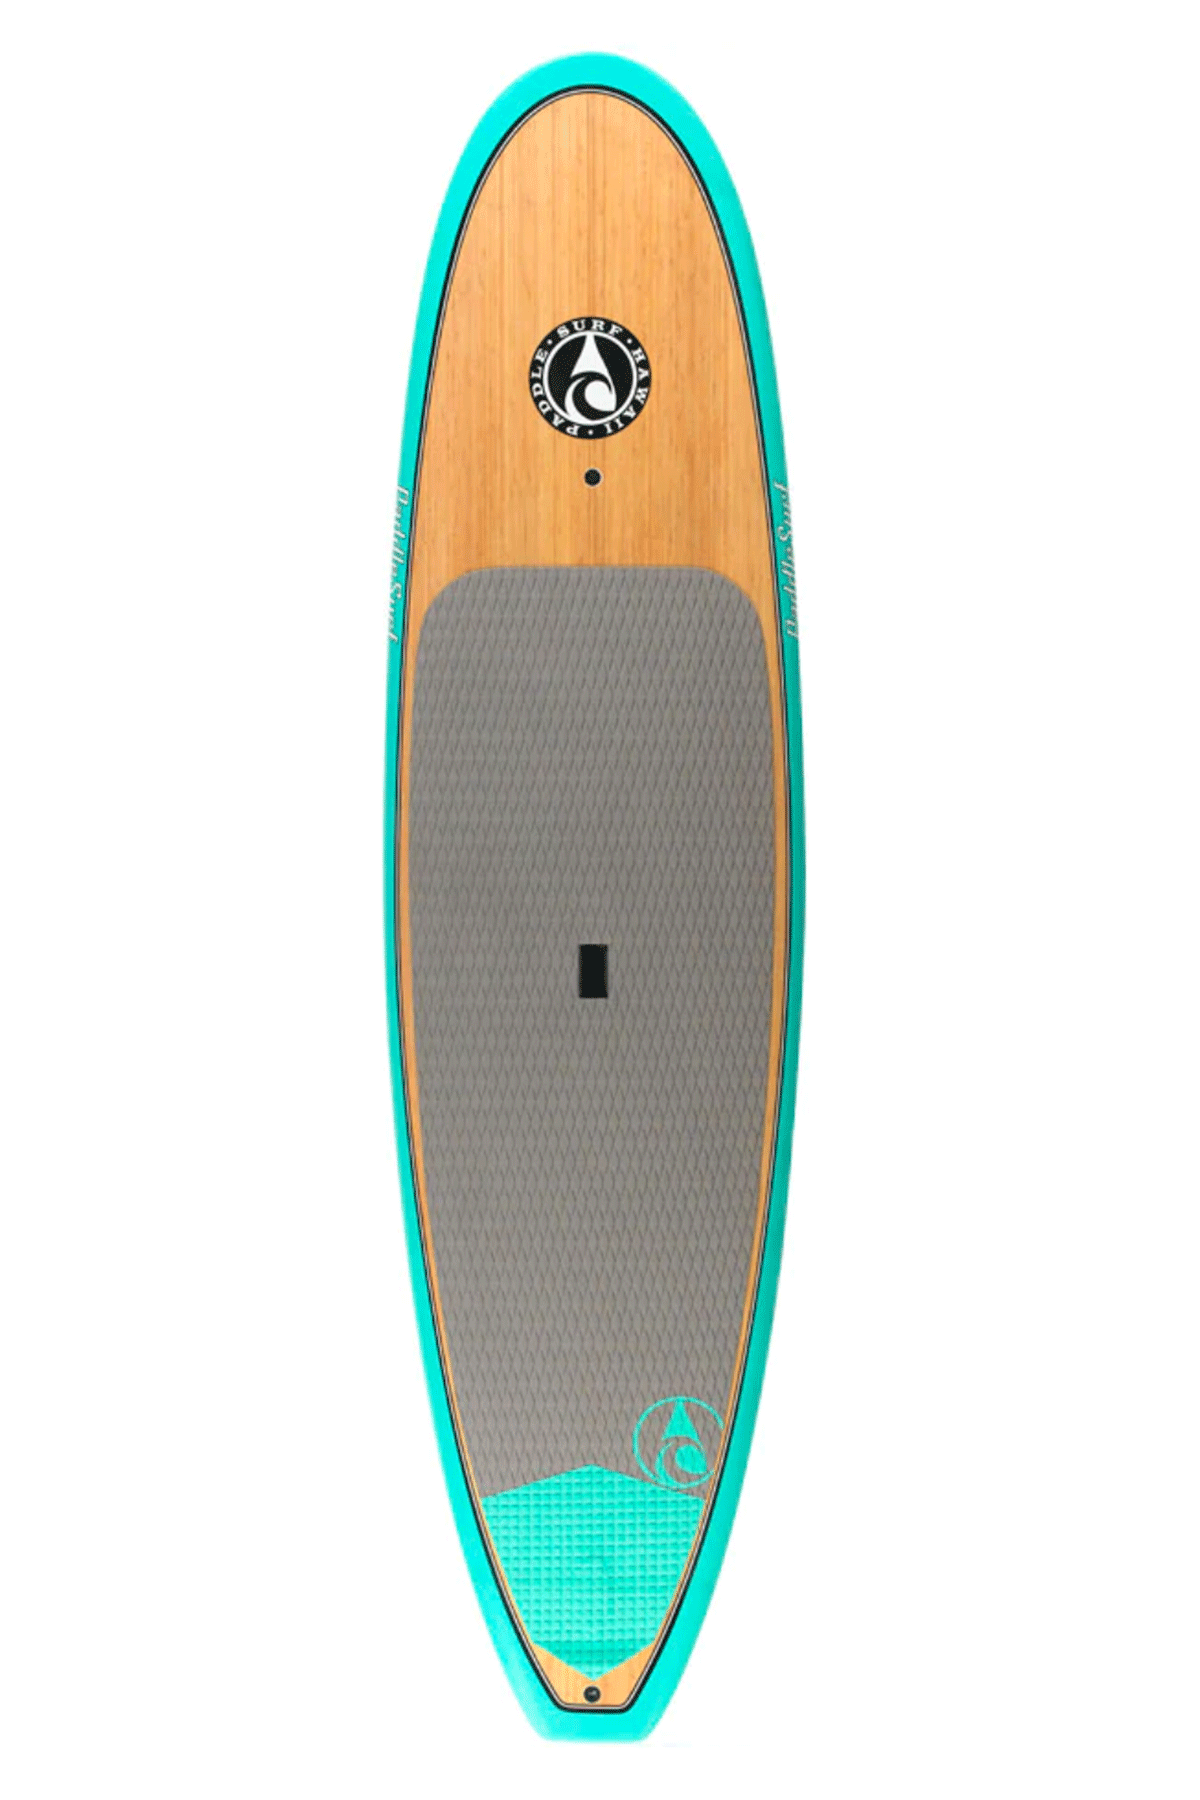 Paddle Surf Hawaii All Rounder top view